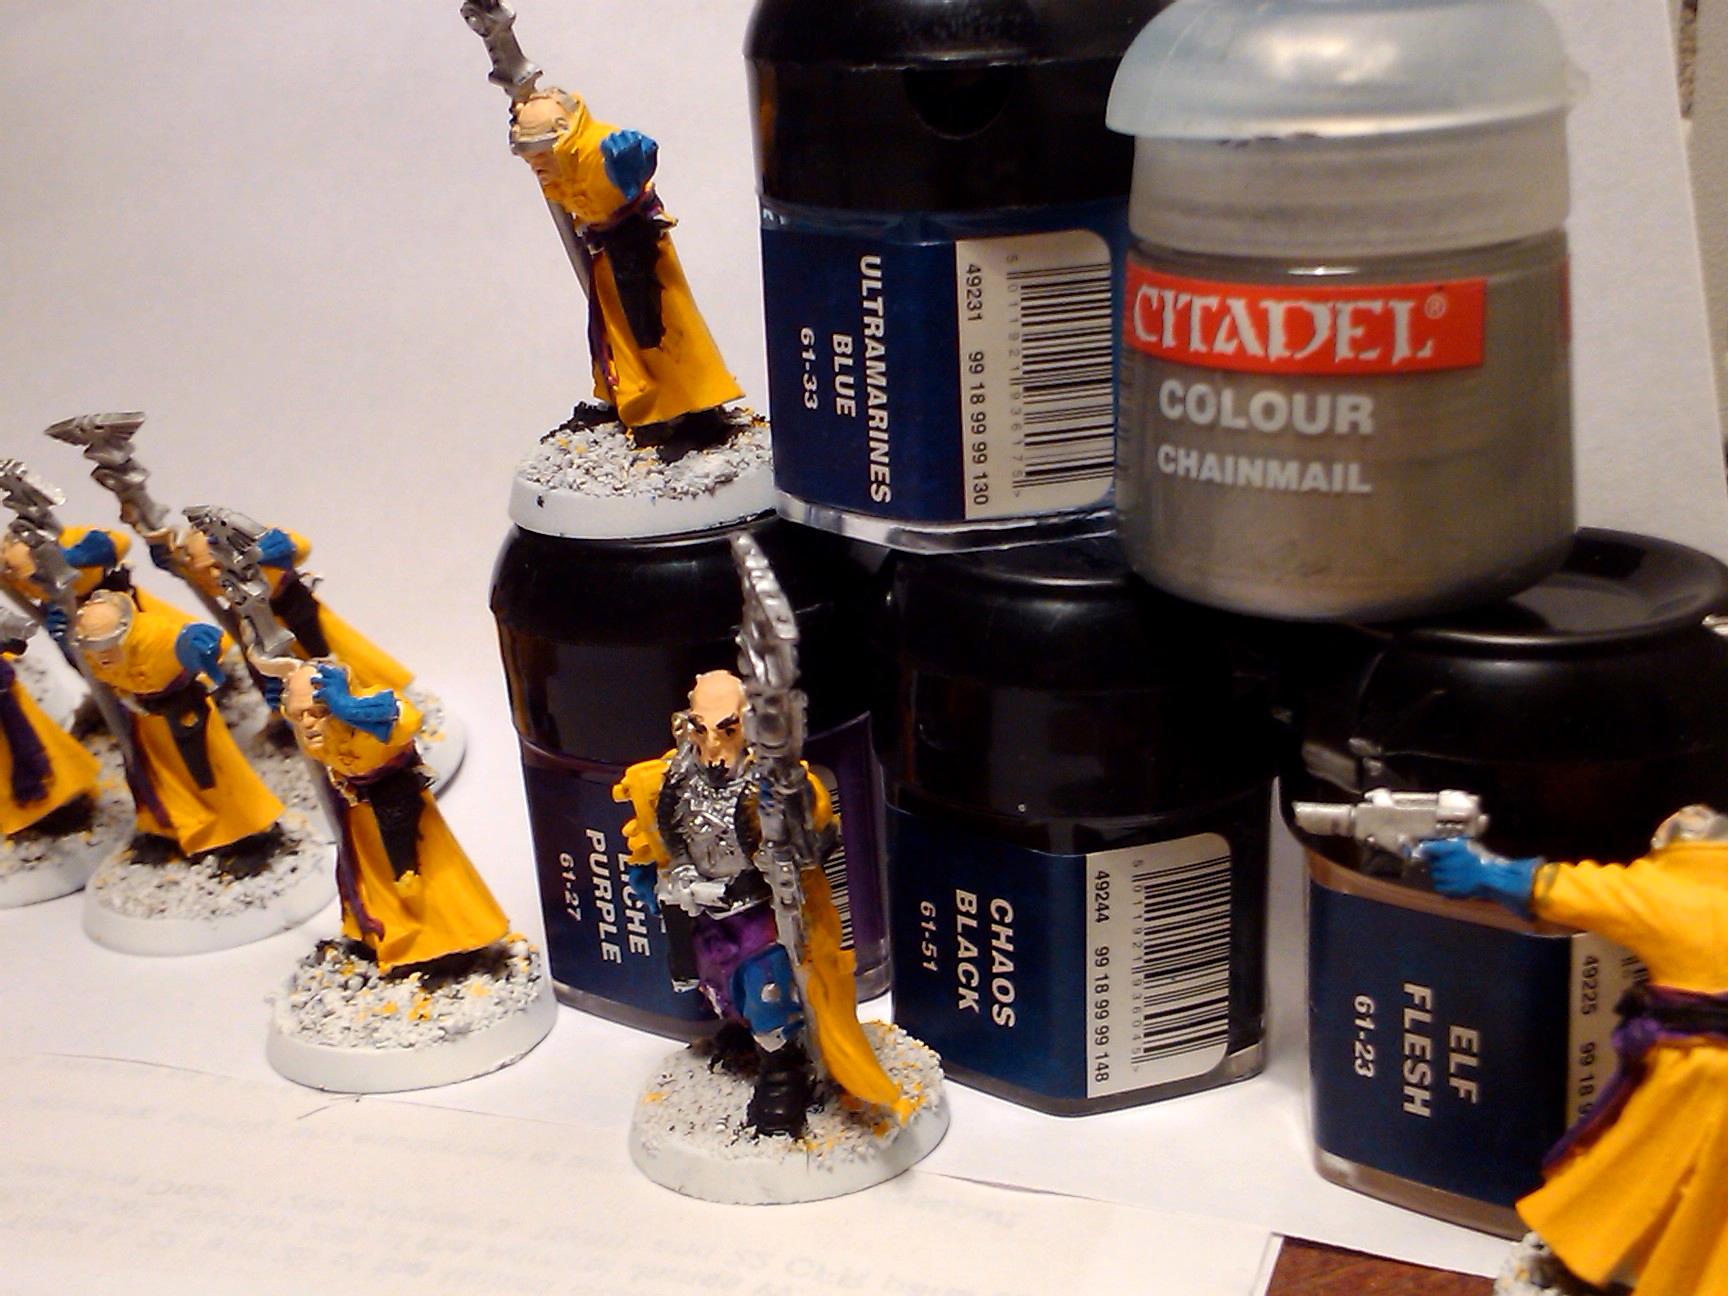 Conversion, Imperial Guard, Mordian Iron Guard, Paint Scheme, Psykers, Warhammer 40,000